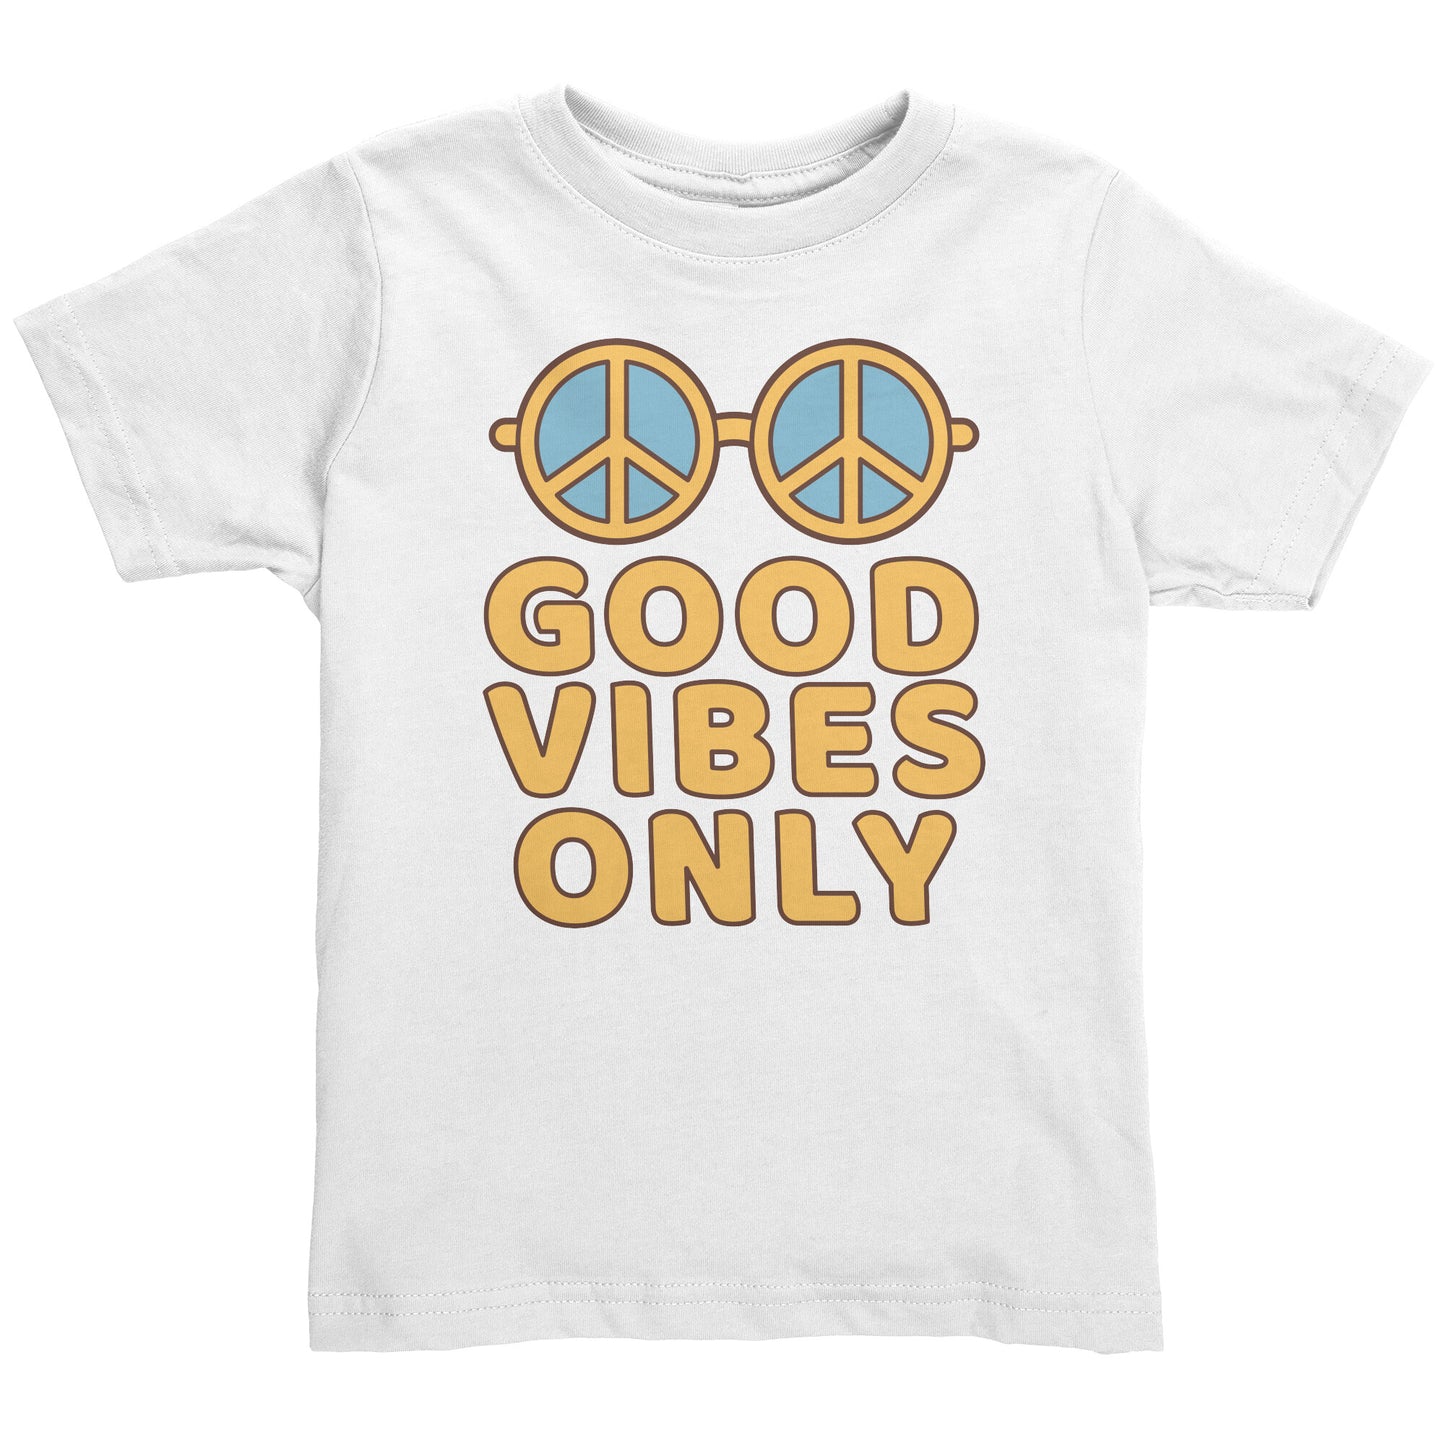 Good Vibes Only Toddler Shirt